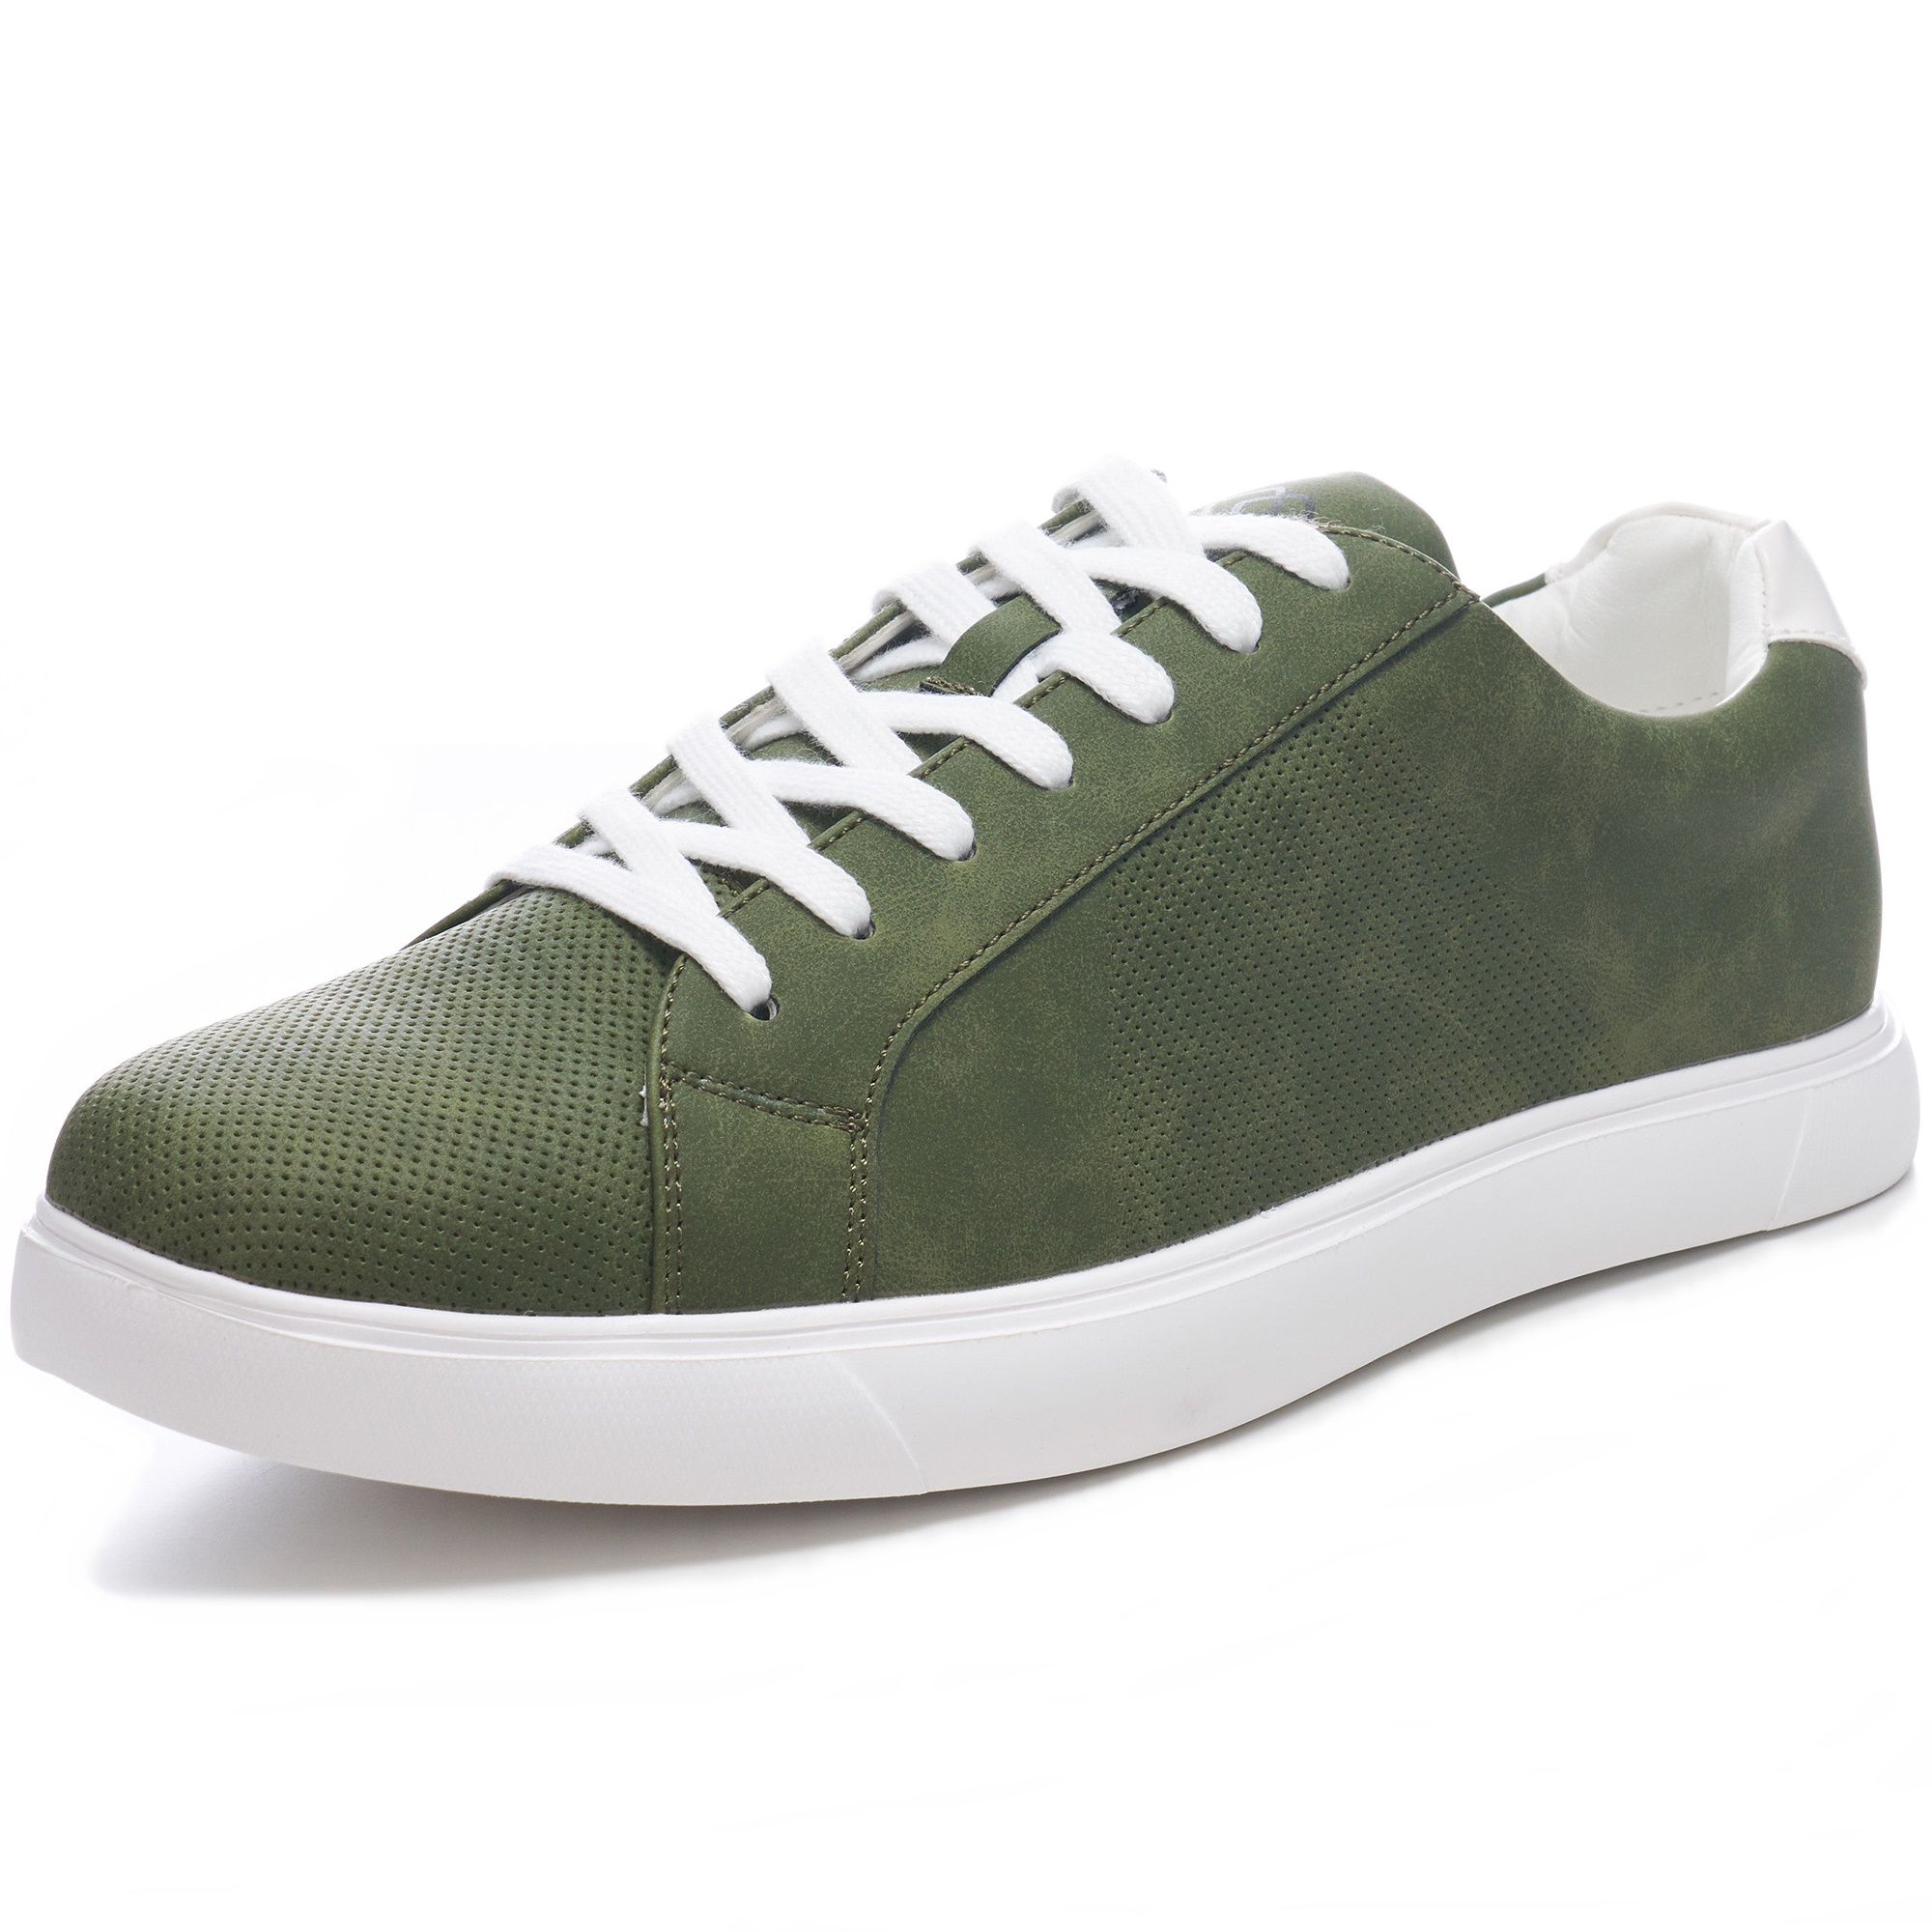 Alpine Swiss Ben Mens Smart Casual Shoes Low Top Sneakers Lace Up Tennis Shoes - image 1 of 5